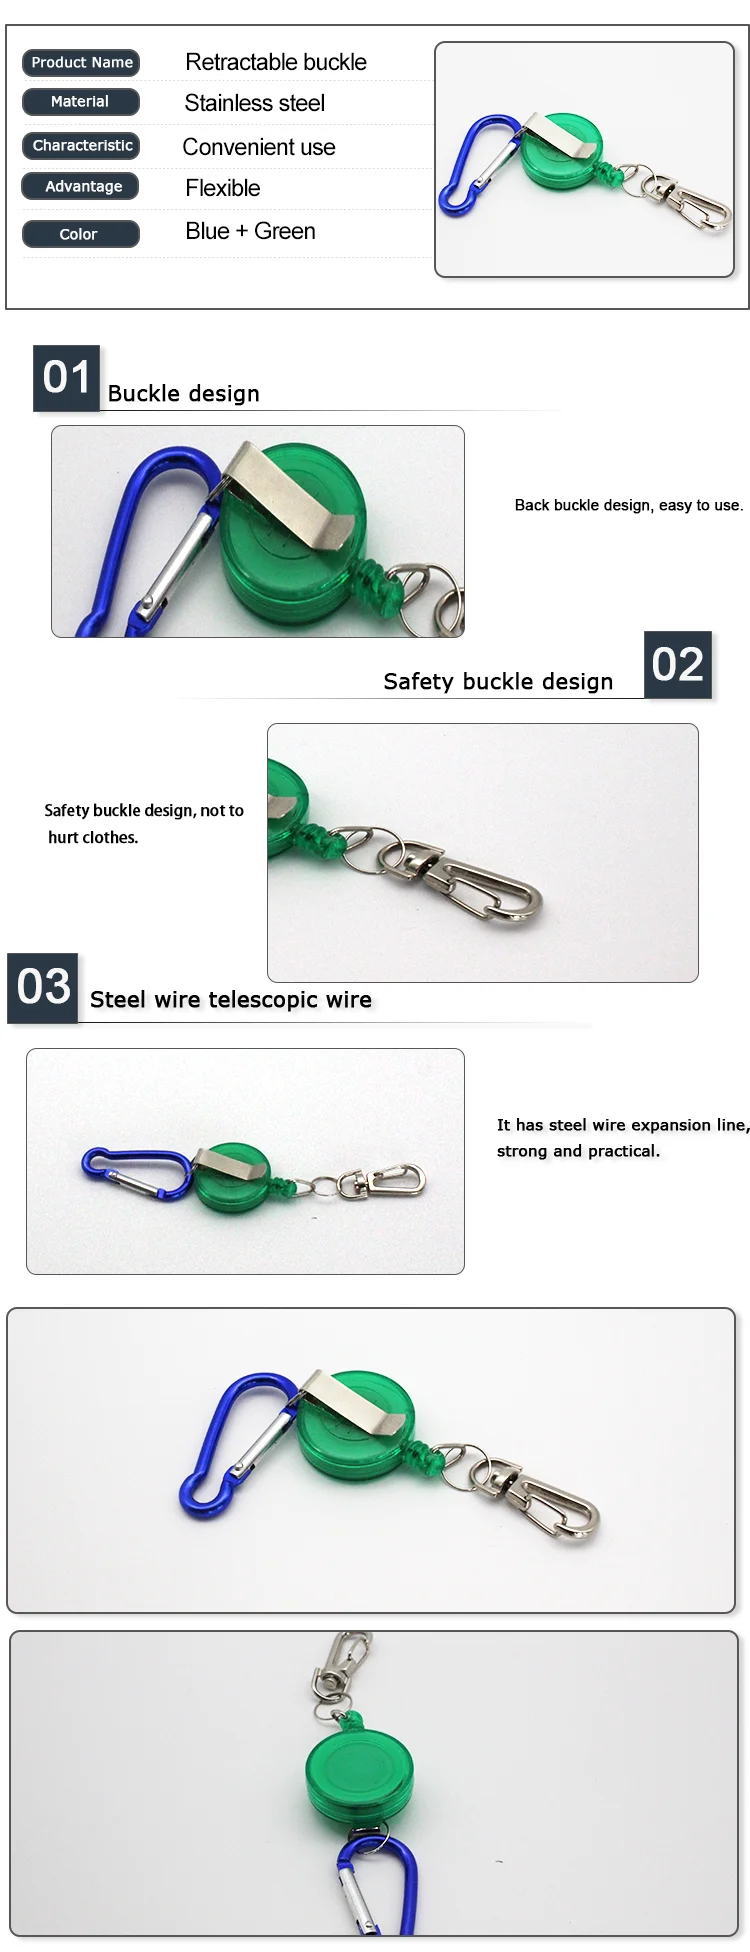  fishing accessories hang scissors and other items fishing supplies Retractable buckle